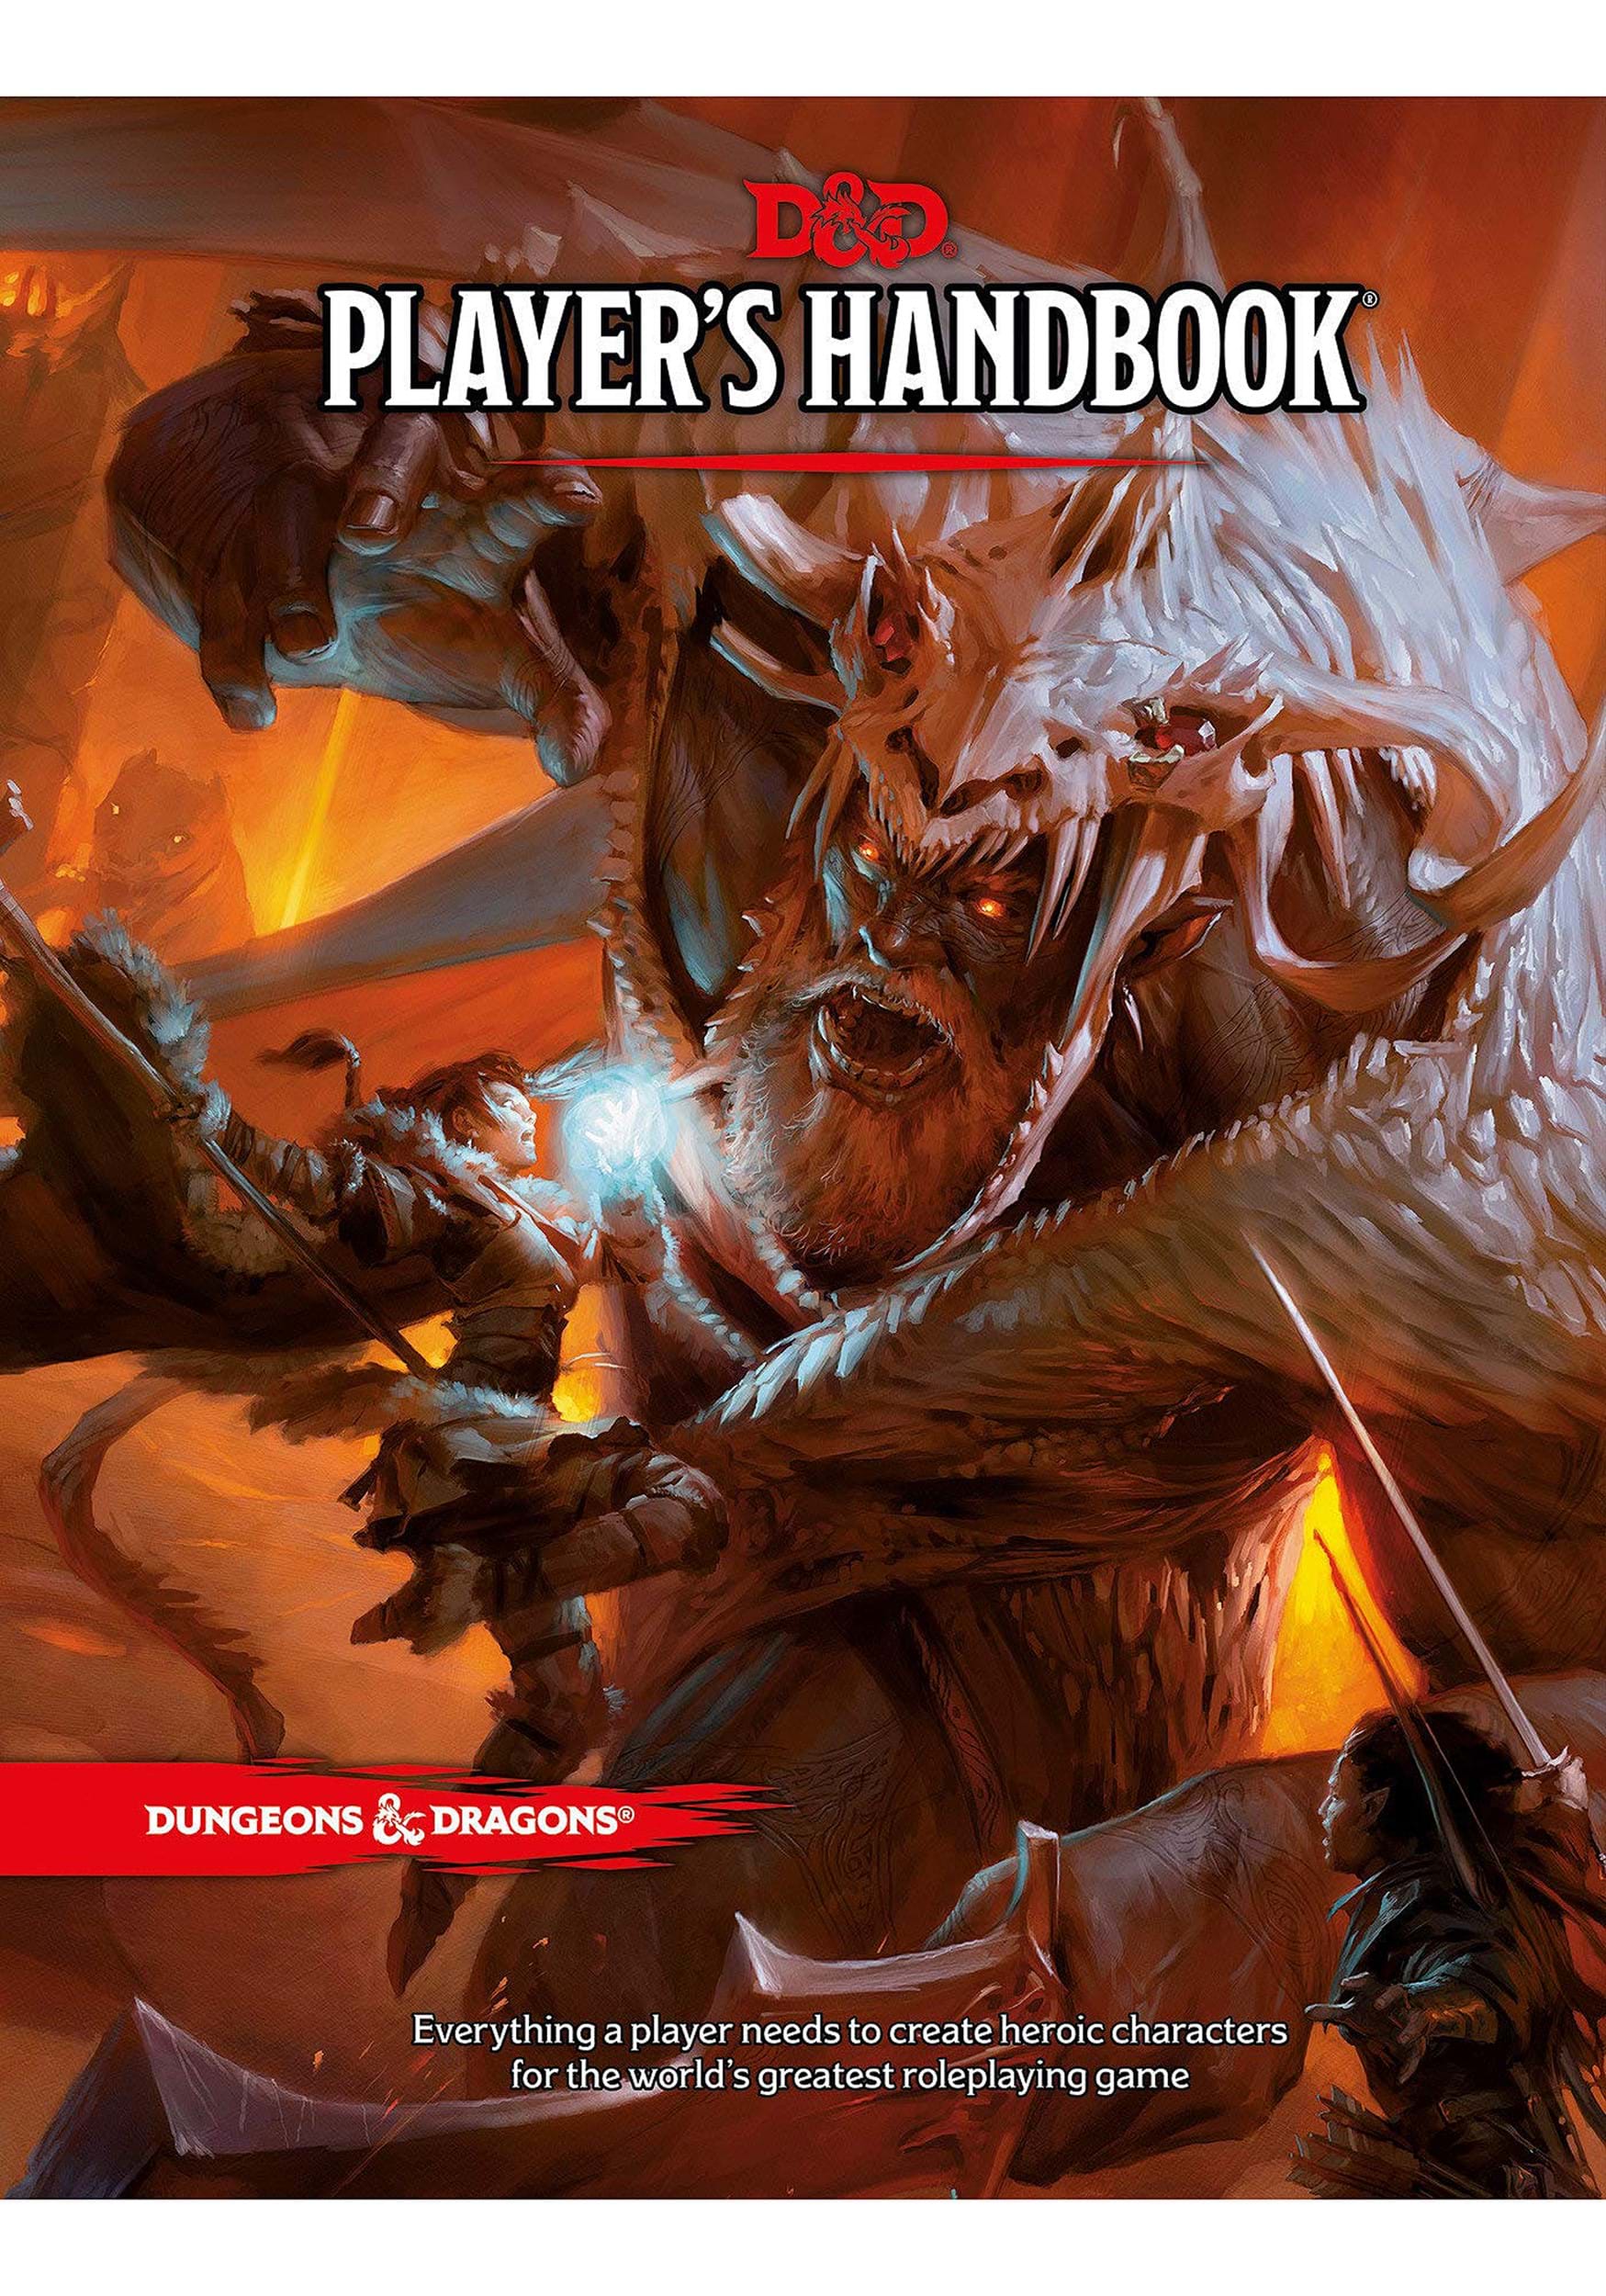 Players Handbook- Dungeons and Dragons RPG